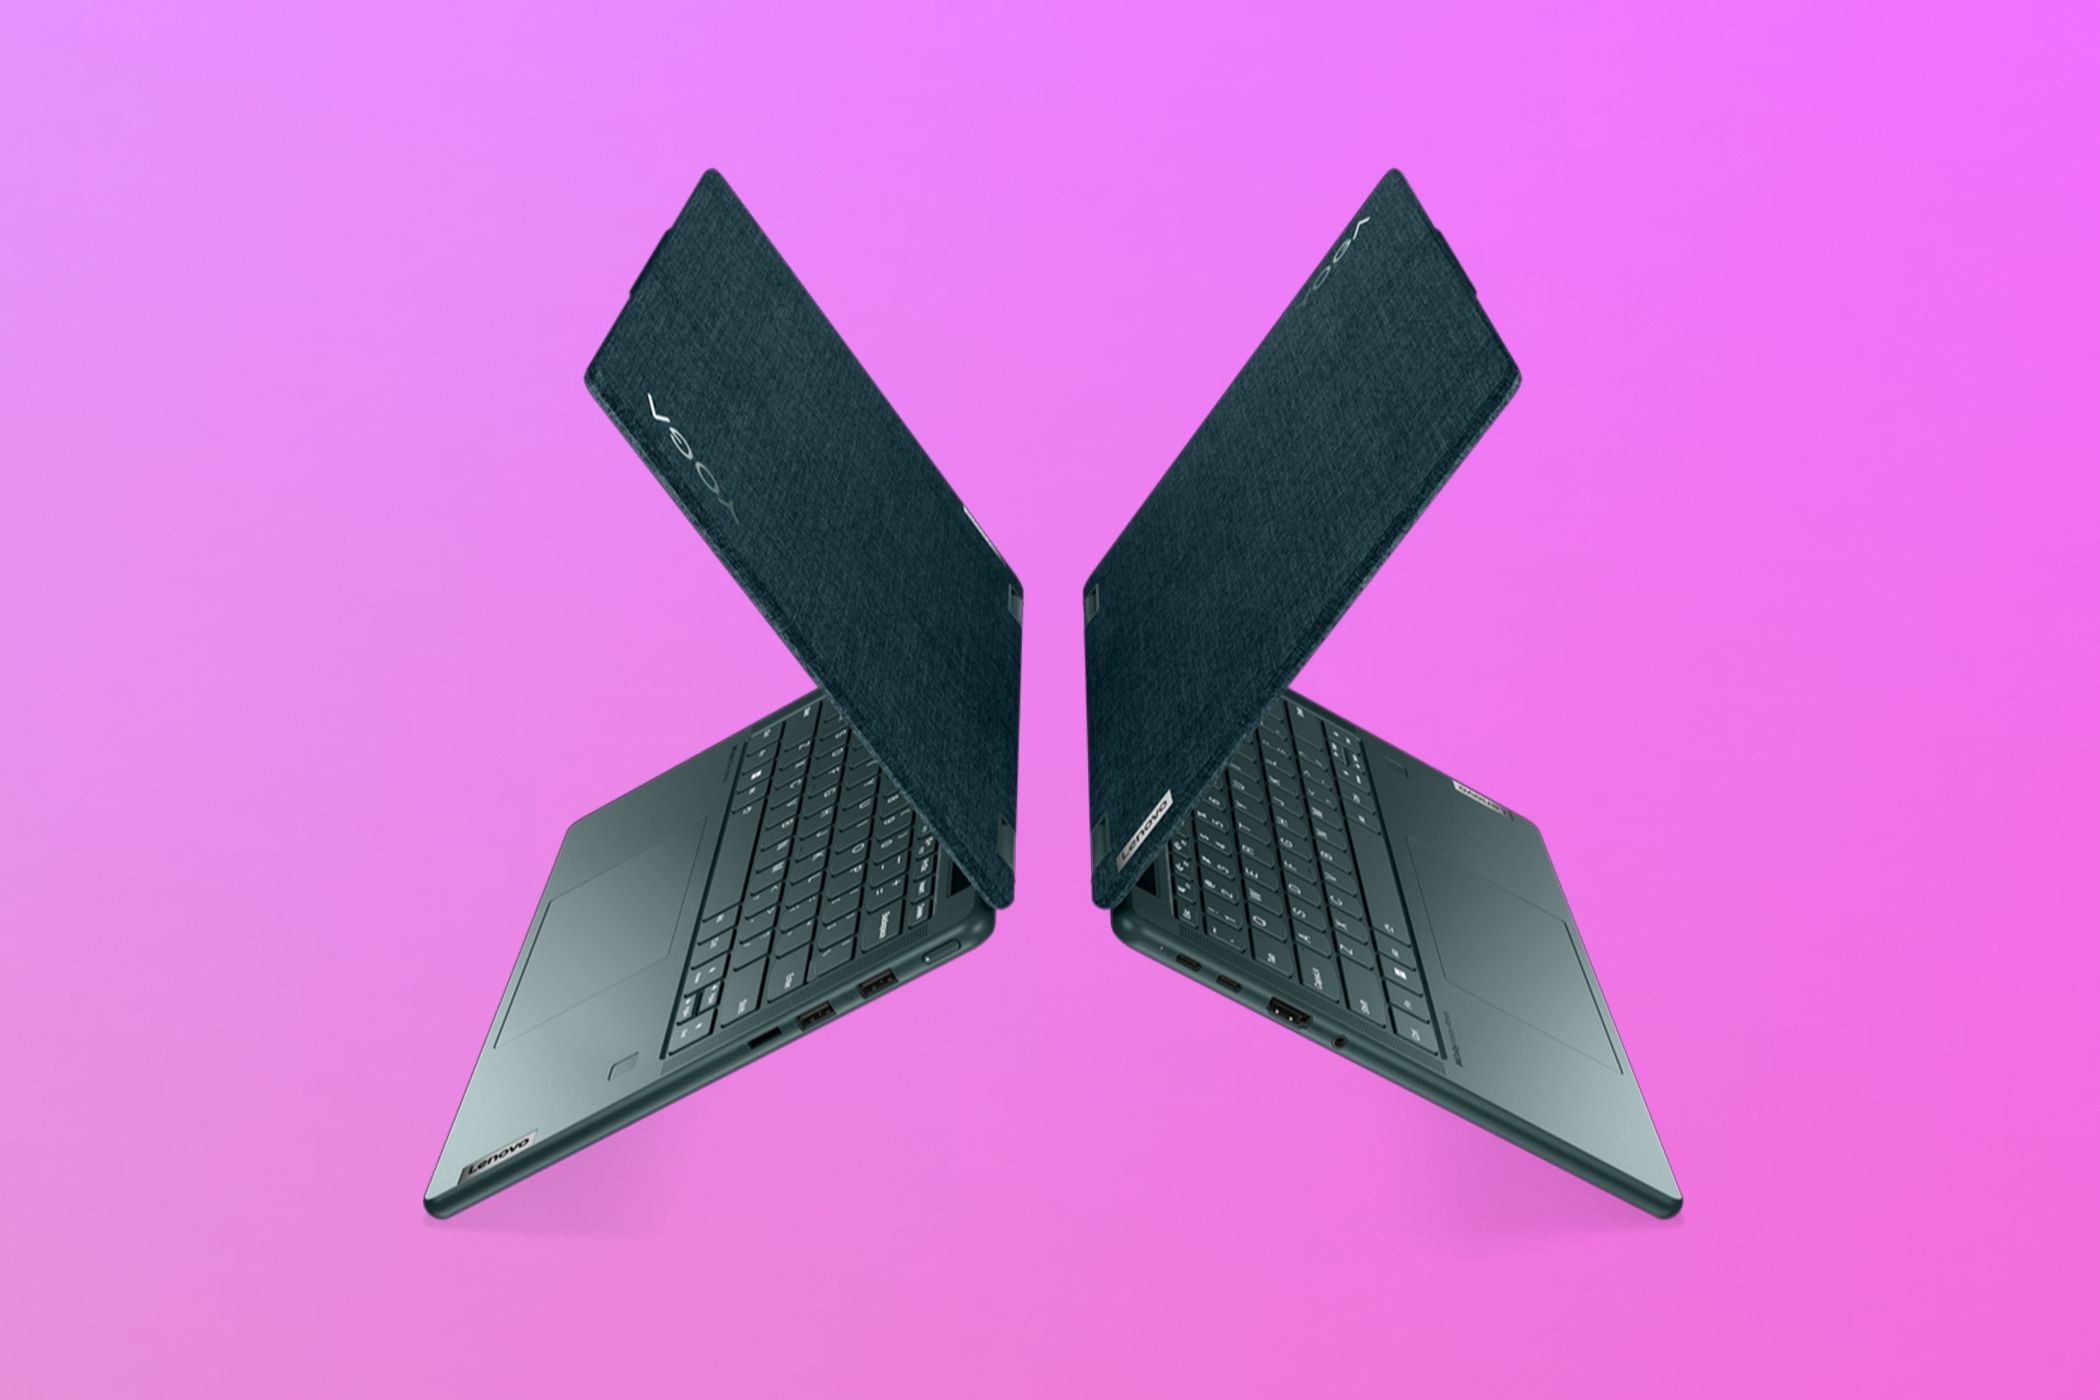 Side view of two Lenovo Yoga 6 laptops with aluminum tops back to back over a pink and purple gradient background